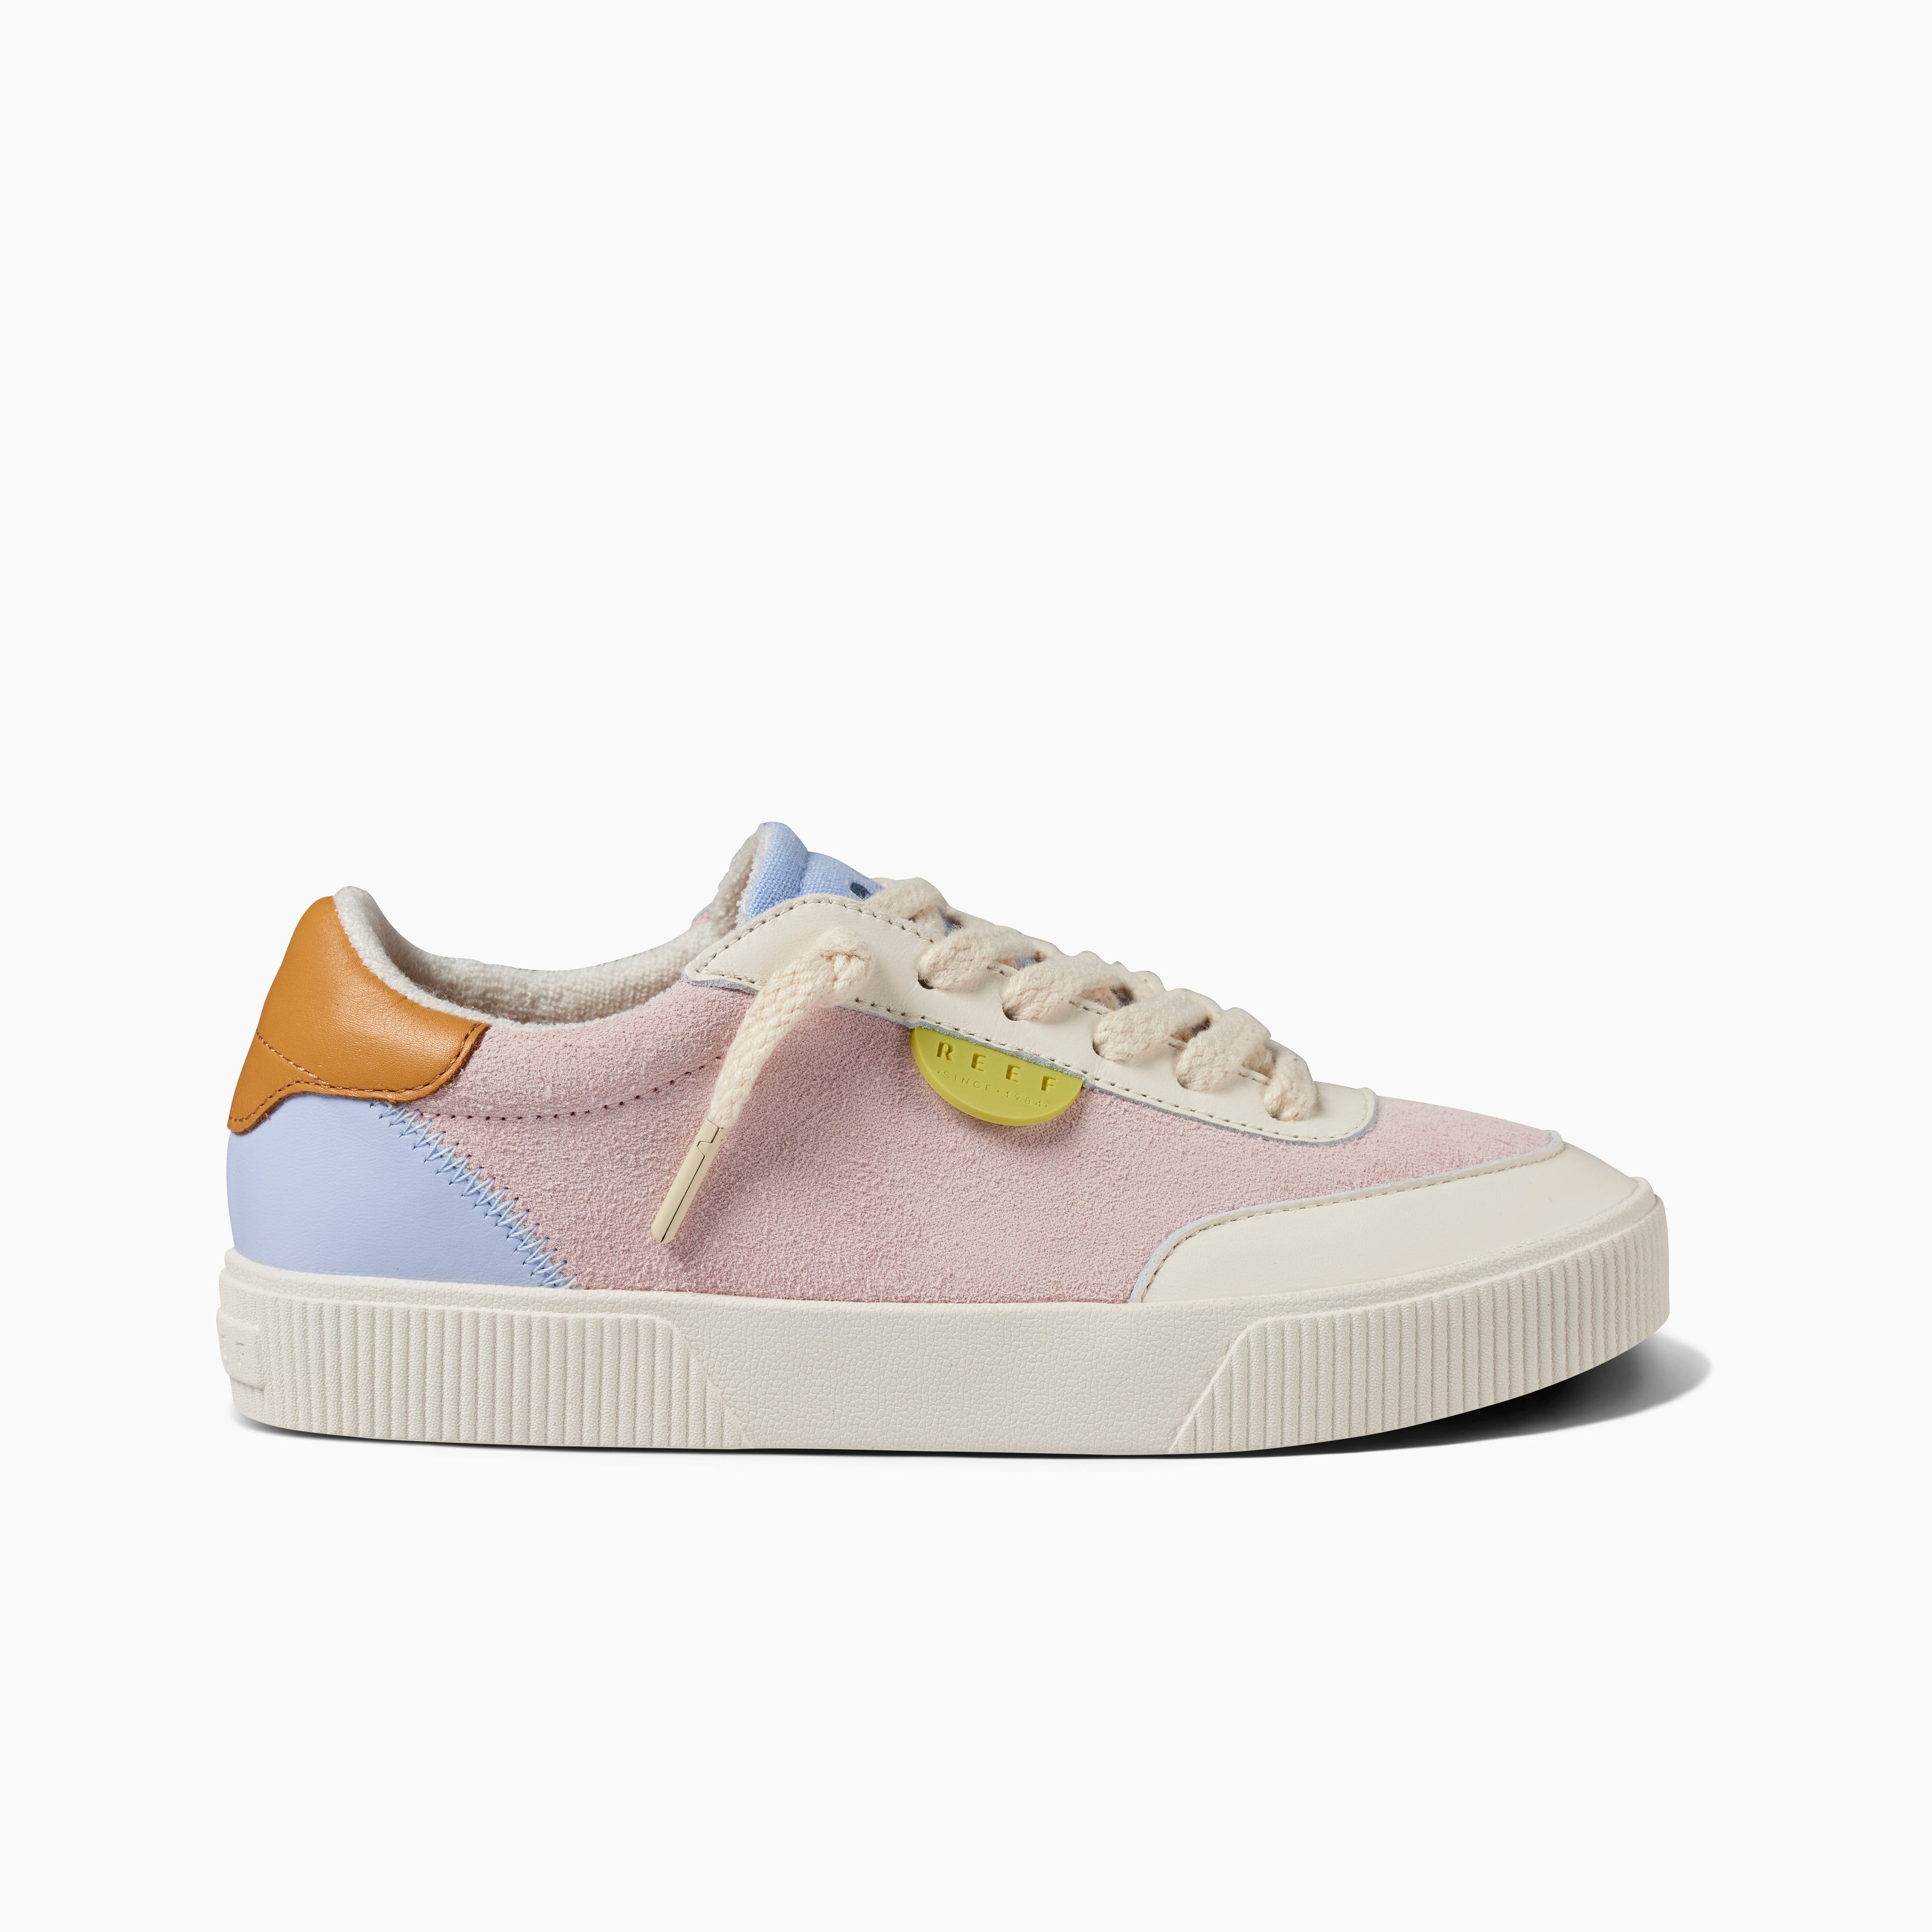 womens sneakers in light purple, blue, yellow, white and leather side view